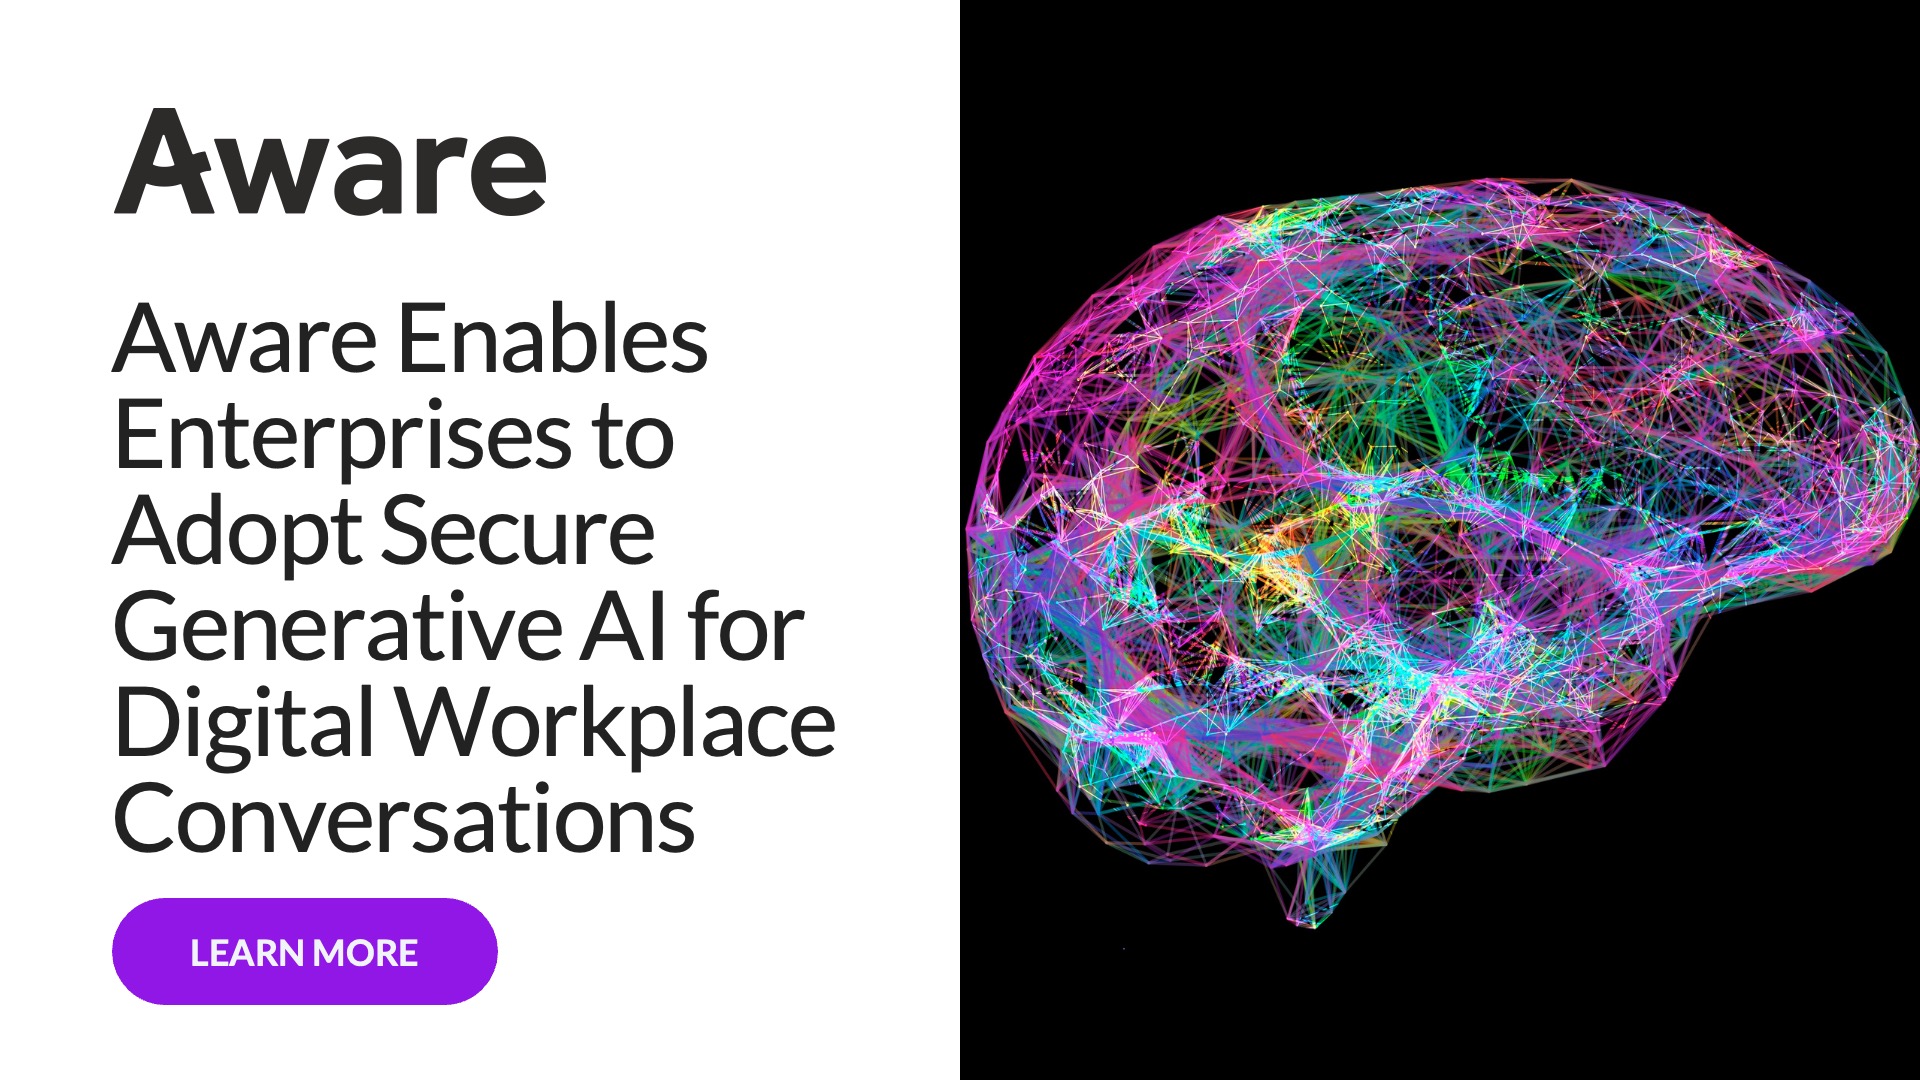 Aware Enables Enterprises to Adopt Secure Generative AI for Digital Workplace Conversations